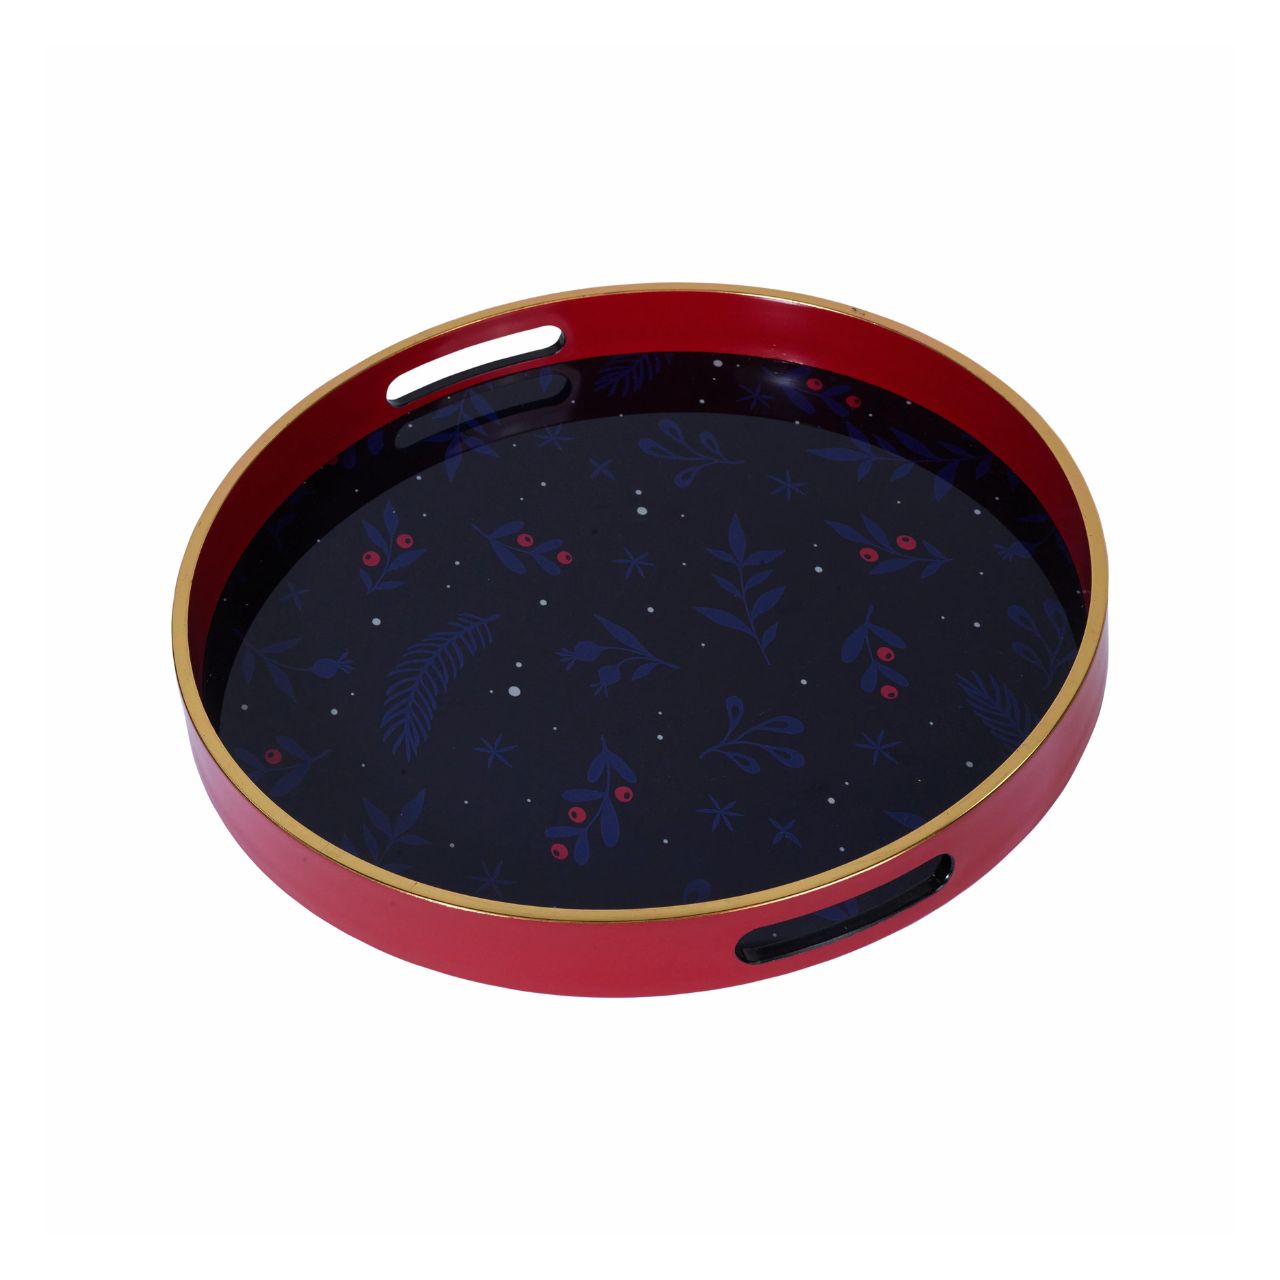 Festive Night Tray by Mindy Brownes A stunning circular tray, with a deep red surround, gold rim, and an evening Christmas floral design finished in deep lavender, with pops of red. An ideal styling accessory this Christmas season.